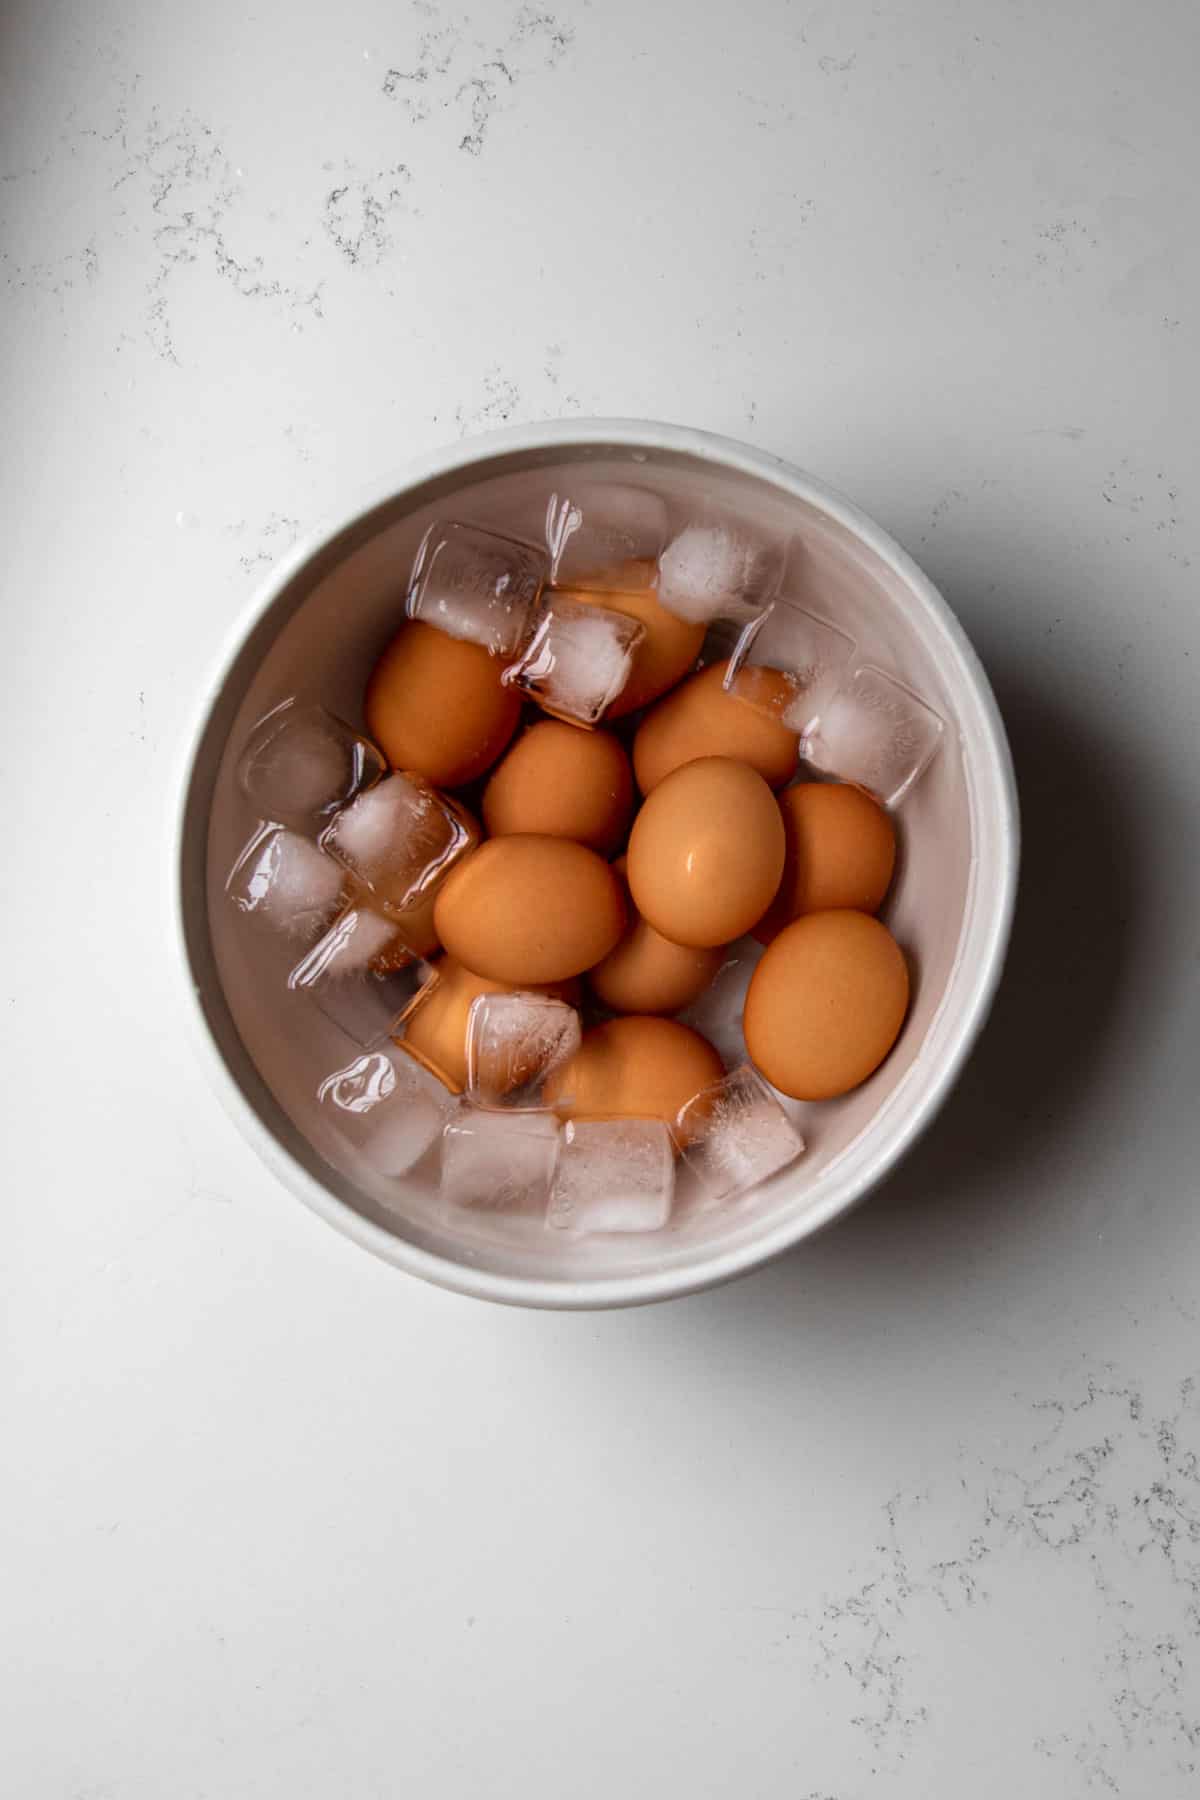 Boiled eggs in a white bowl filled with cold water and ice on a marble table.